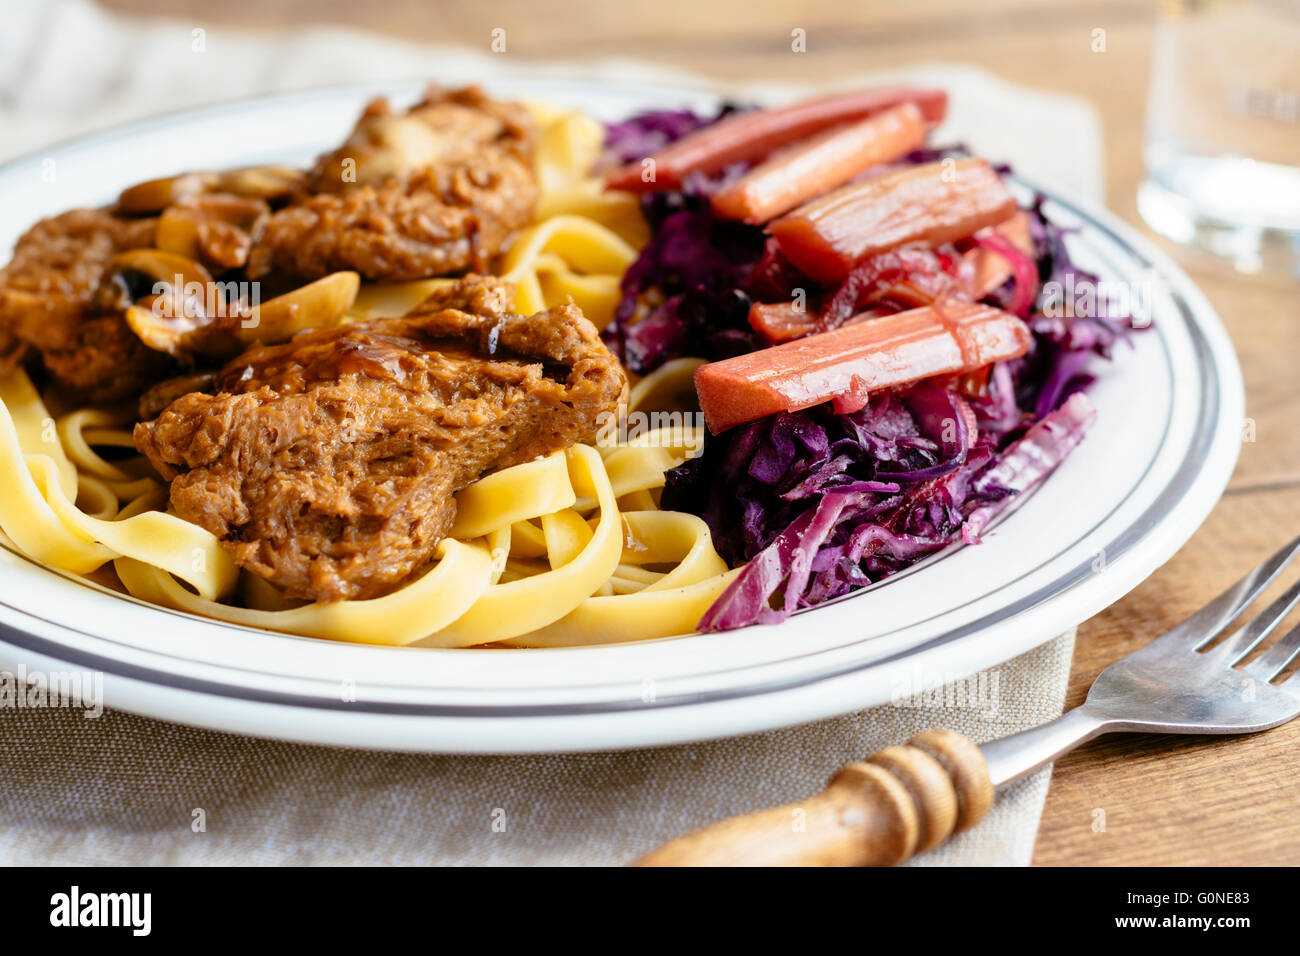 TVP Medallions and Red Cabbage with Rhubarb Sauce Stock Photo